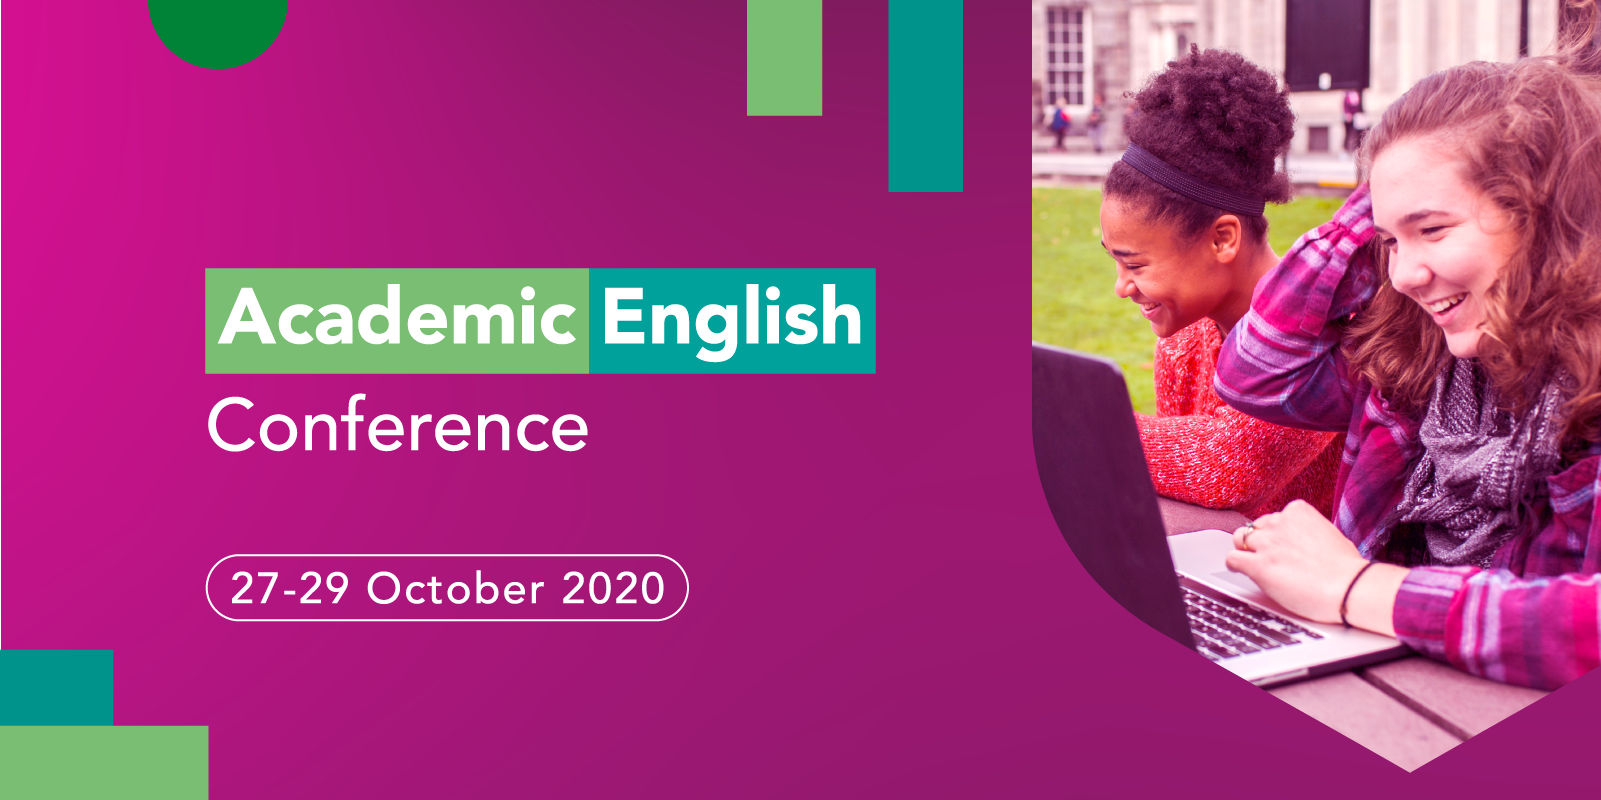 Academic English Conference